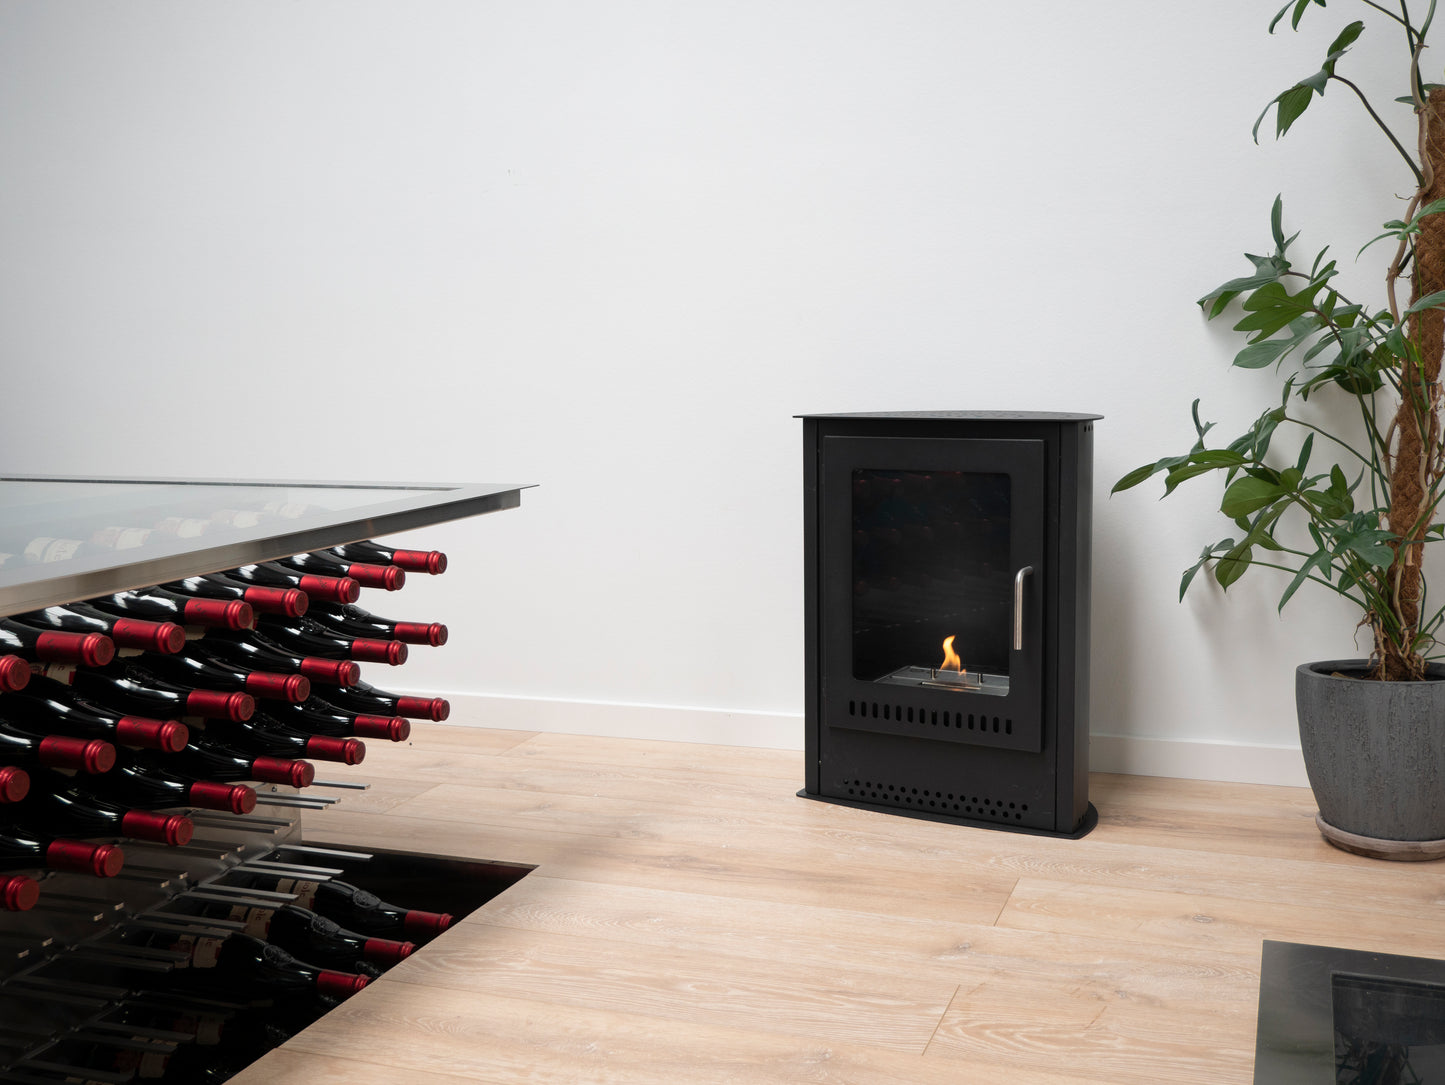 Carson - Small Bioethanol Stove Freestanding Fireplace